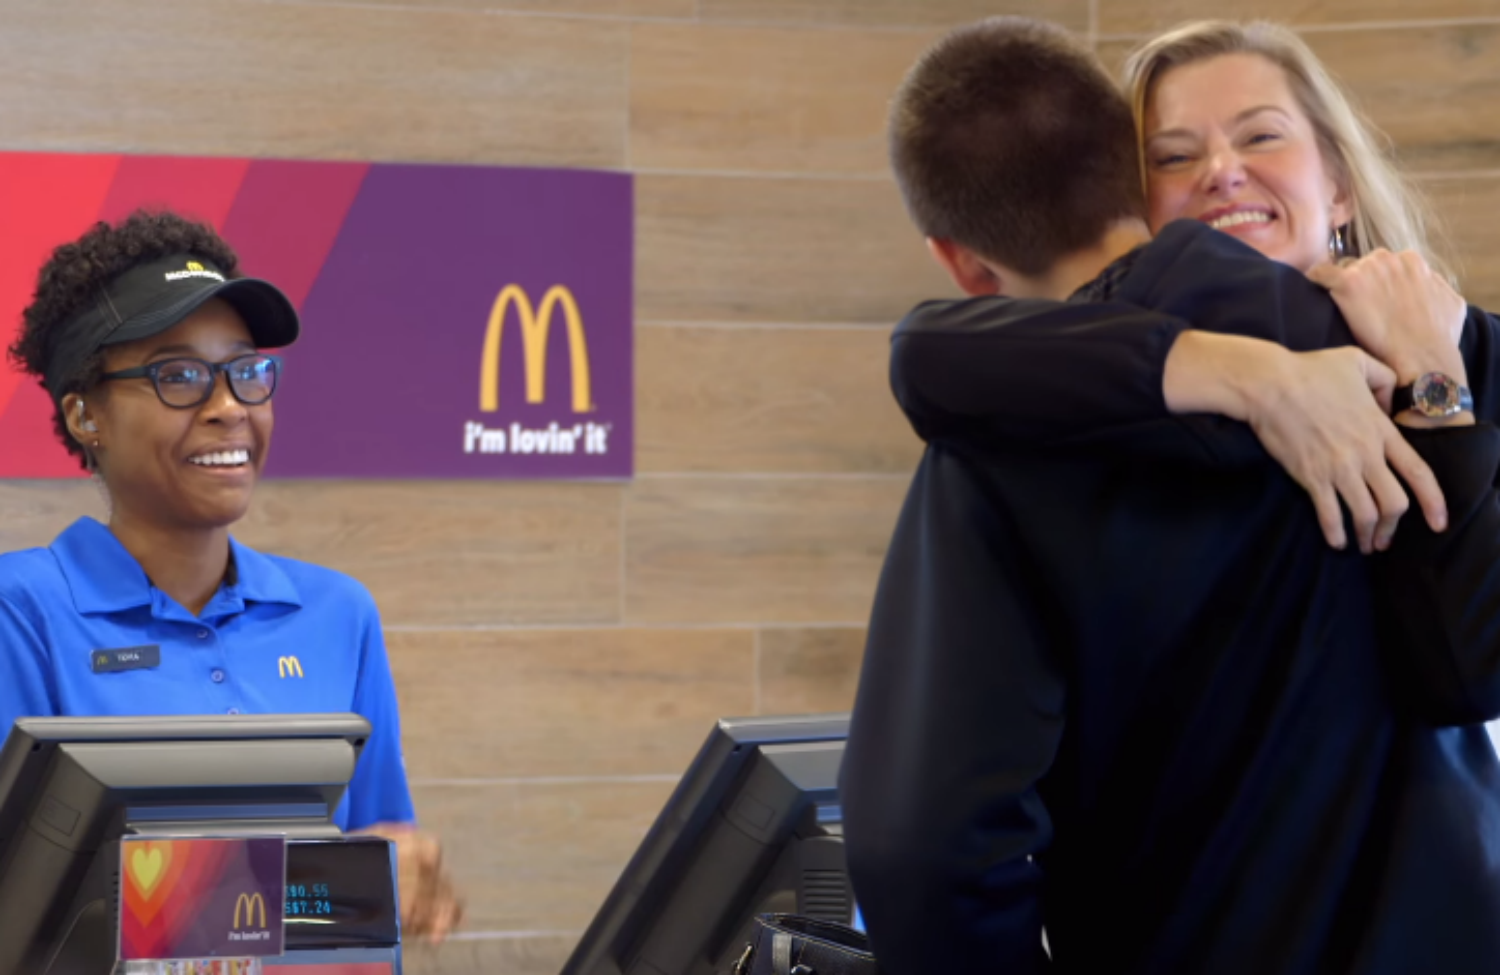 A Job at McDonald’s Now Includes Singing and Dancing on Demand